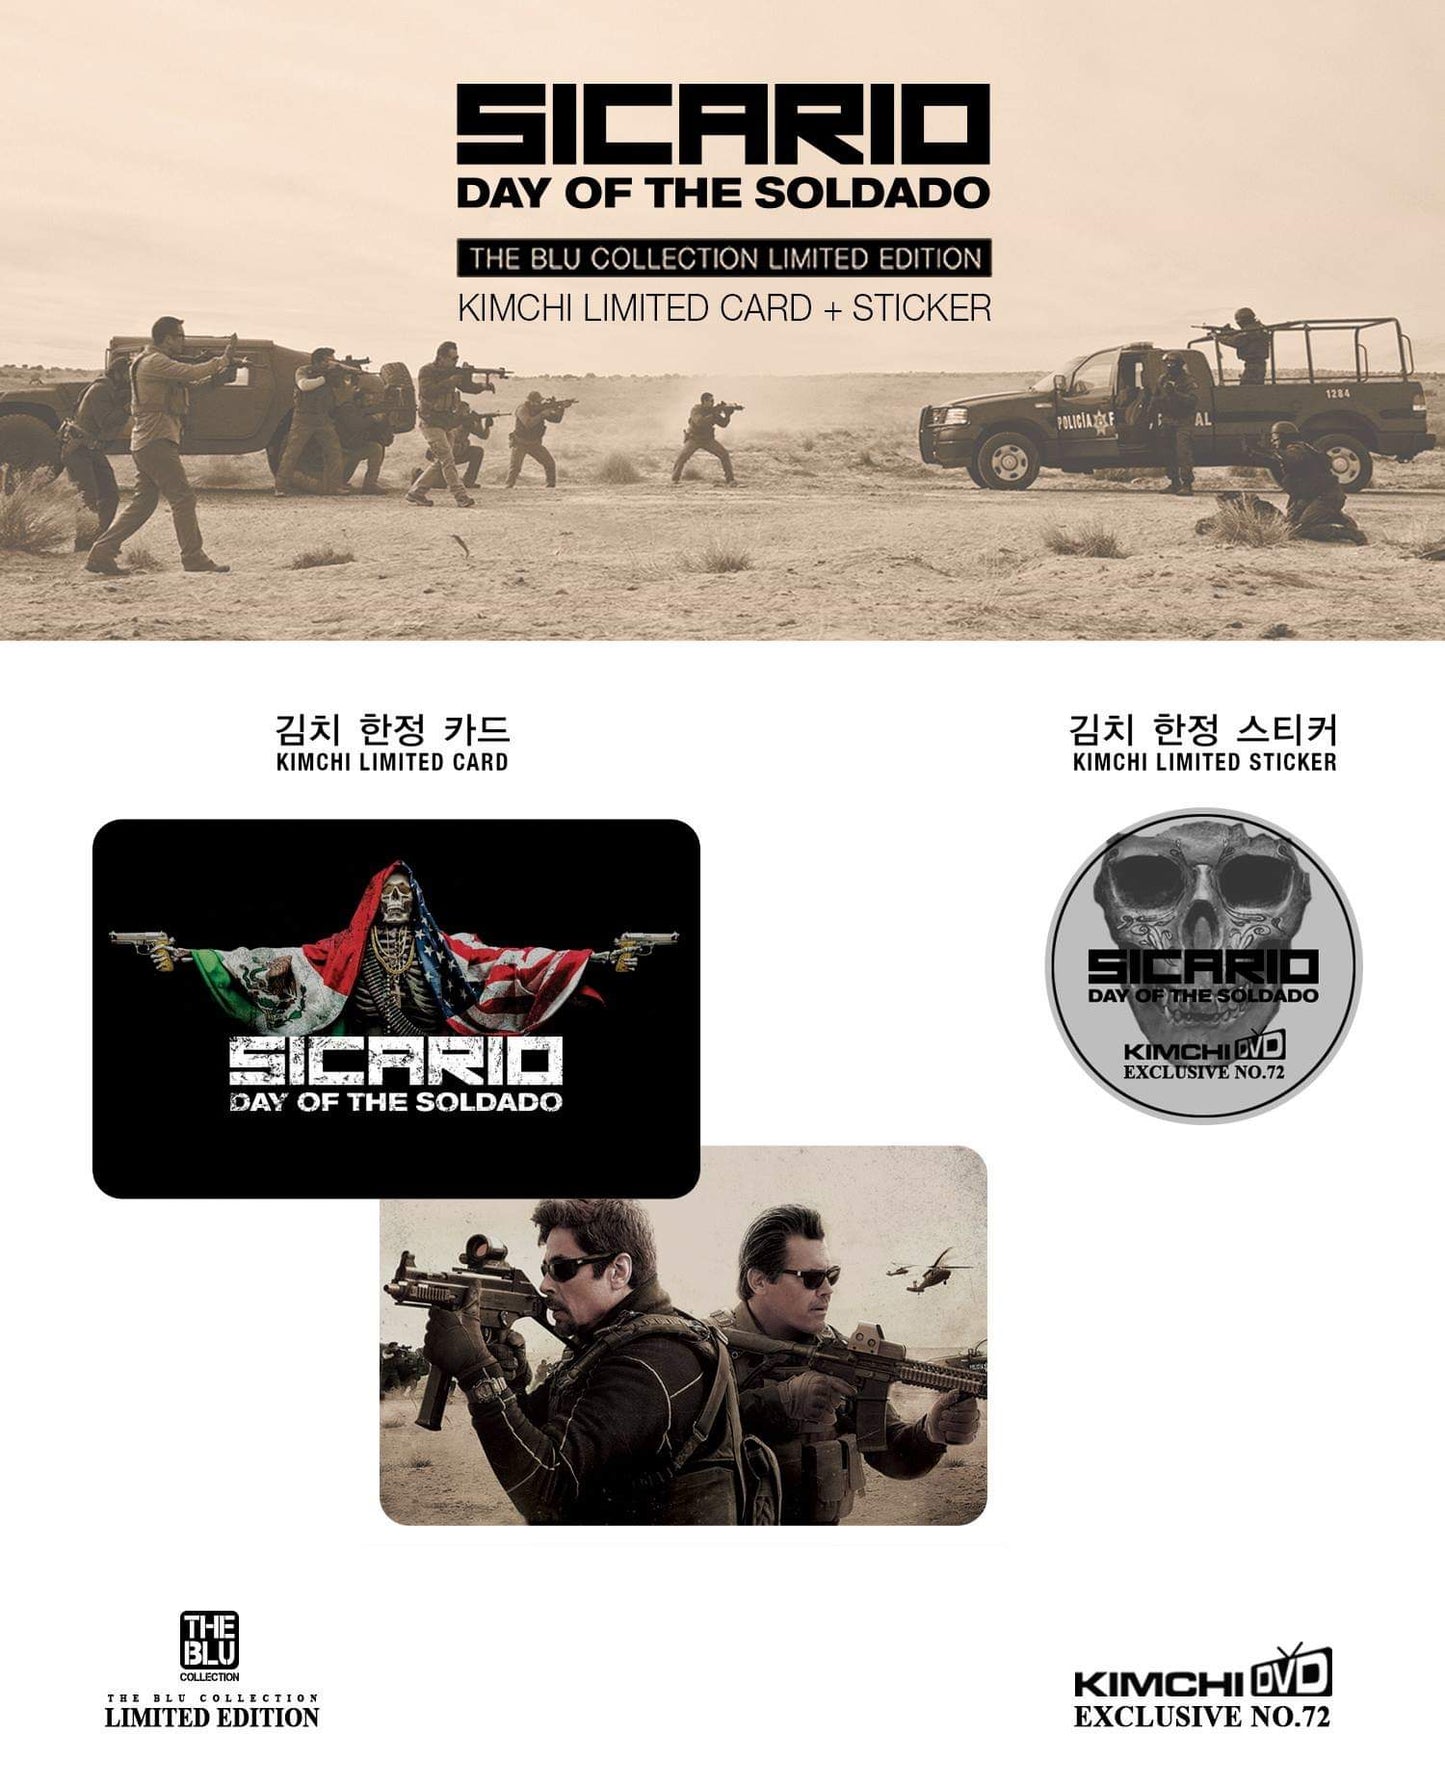 Sicario: Day of the Soldado 4K Blu-ray Steelbook The Blu Collection KimchiDVD Exclusive #73 One Click Box